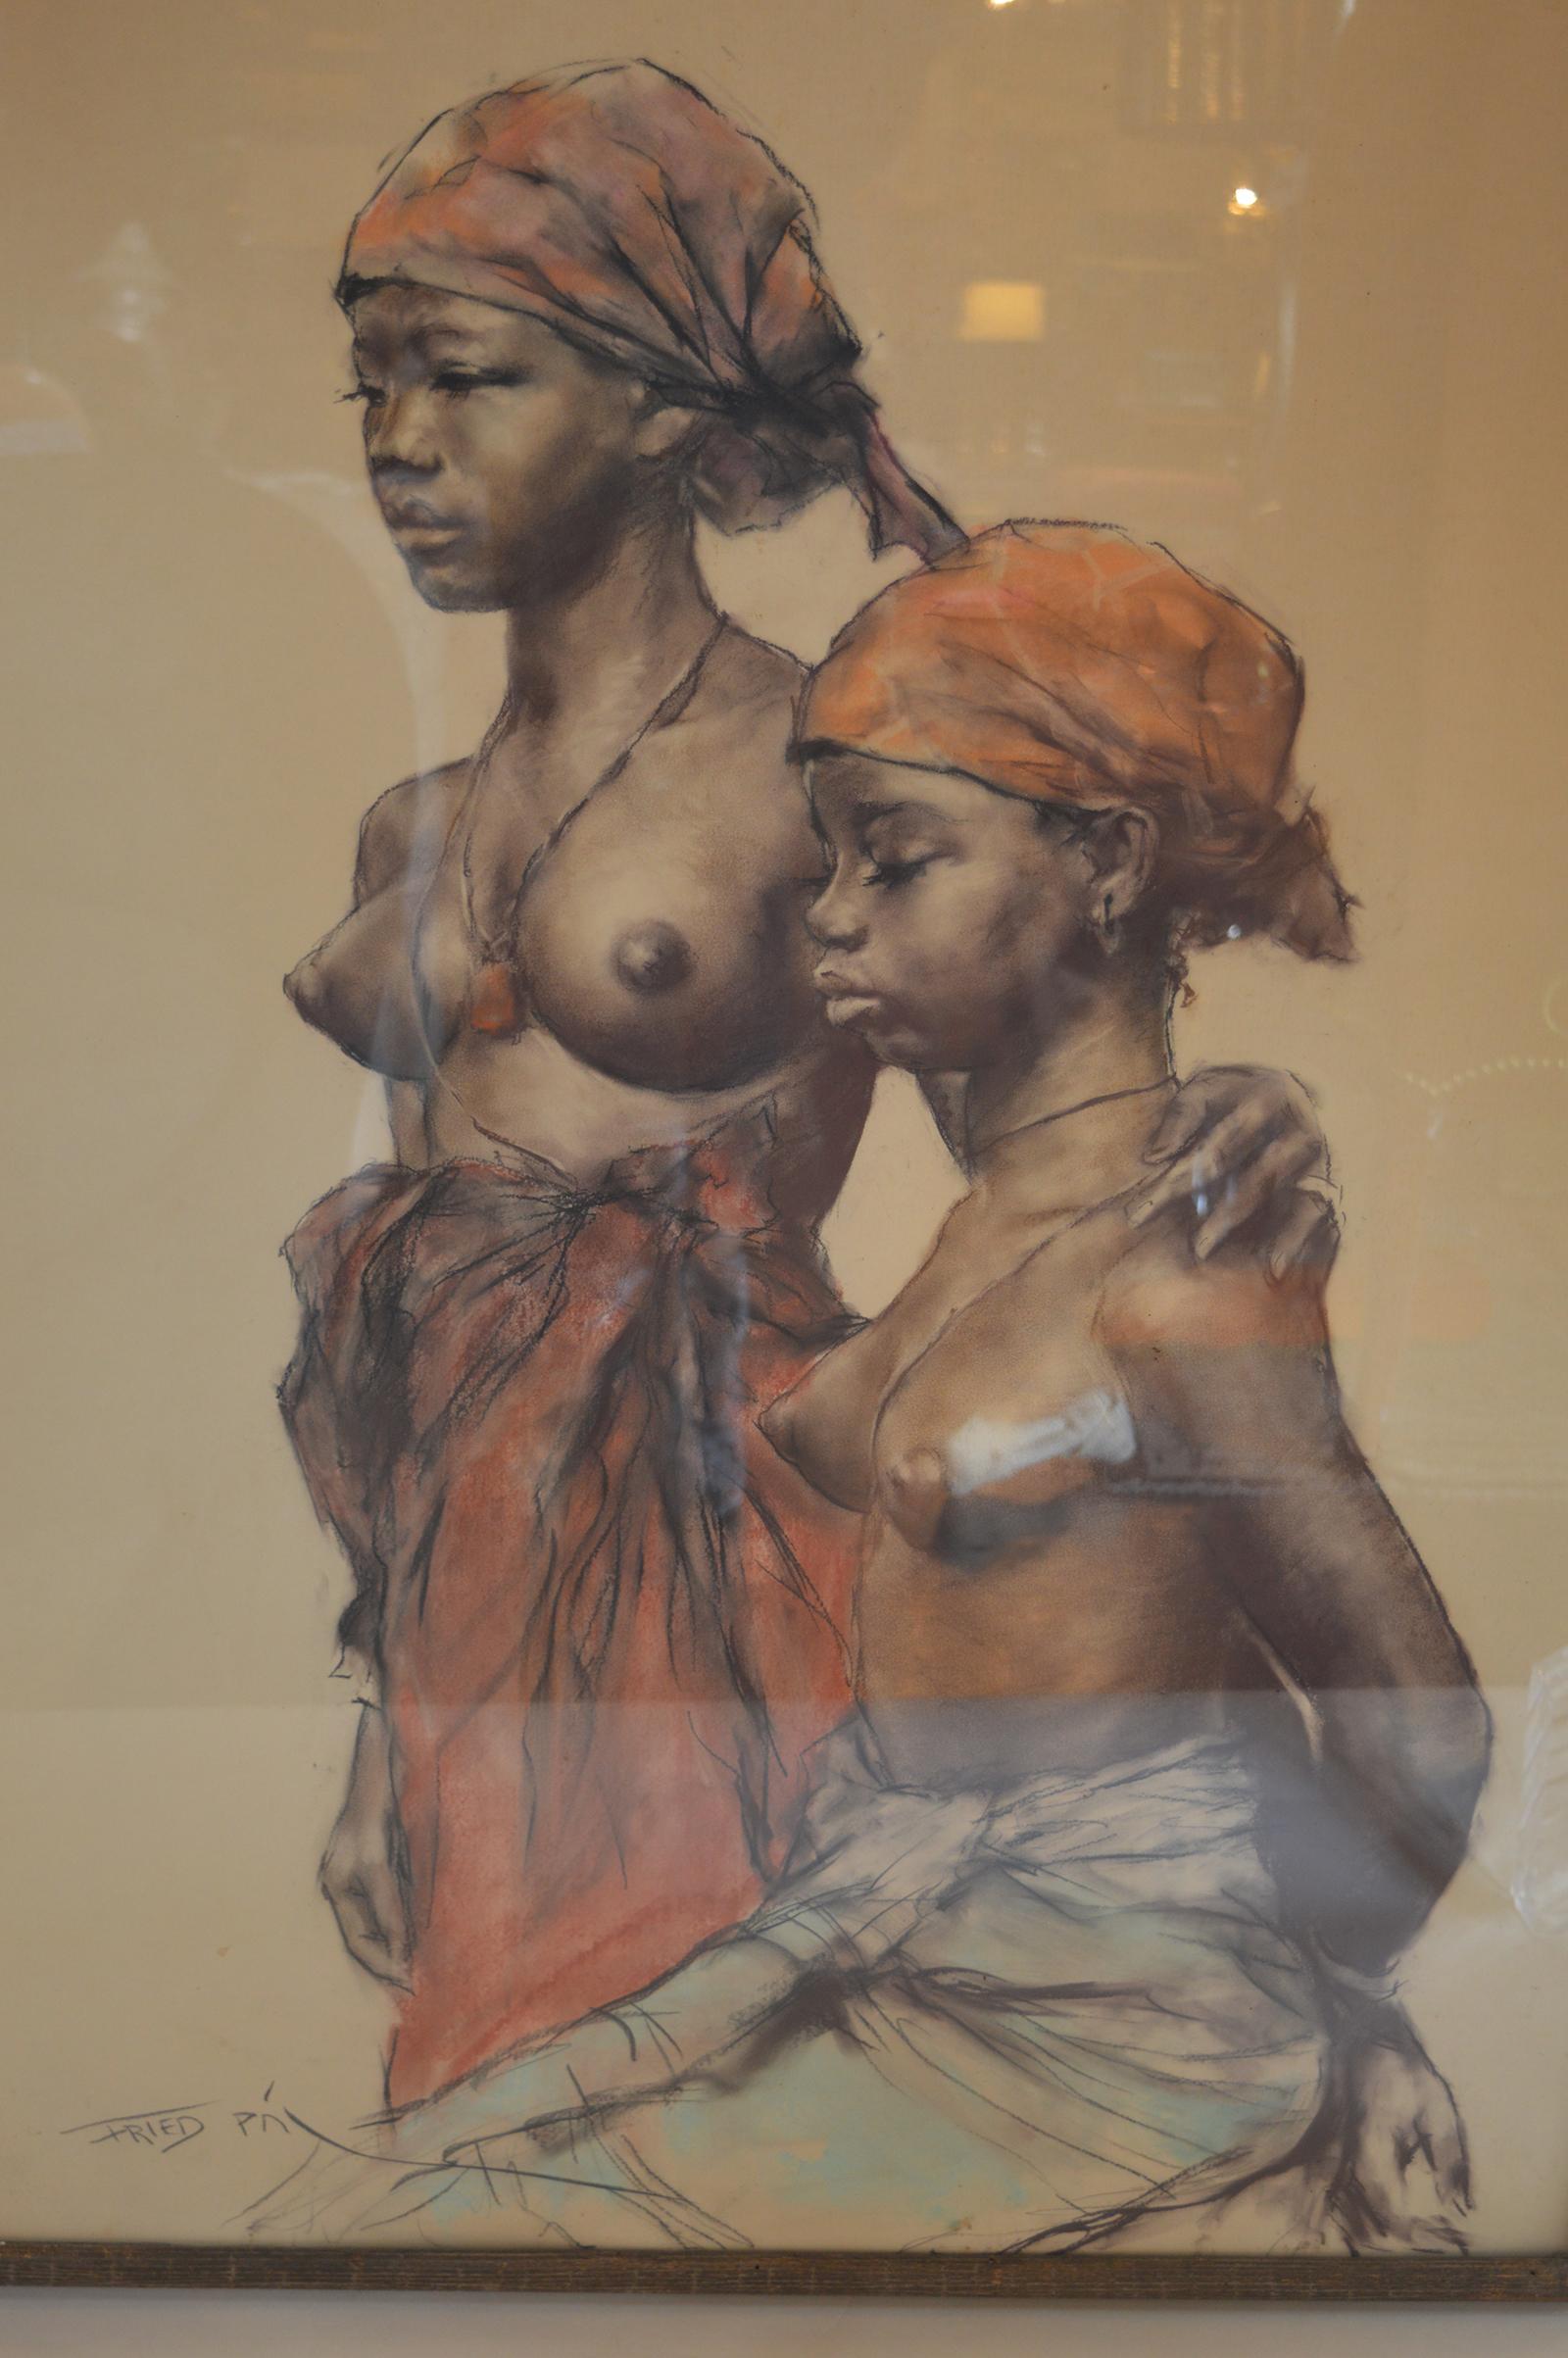 Two African Woman pastel on paper by Pal Fried, an American/Hungarian artist. From the estate of Zsa Zsa Gabor.